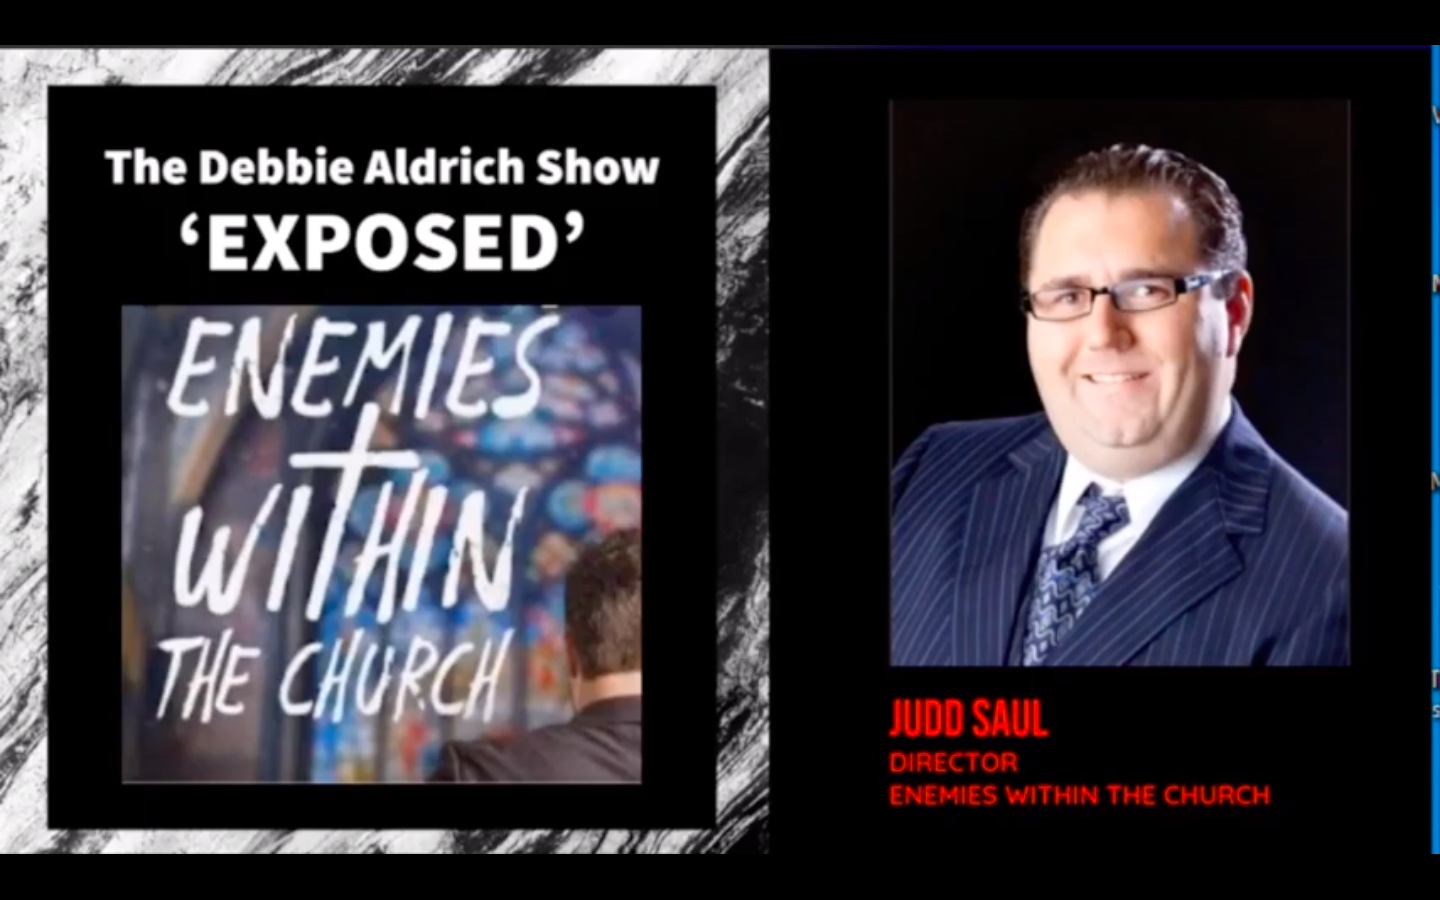 Judd Saul, Film Director, Discusses His Upcoming Movie "Enemies Within The Church" With Debbie Aldrich